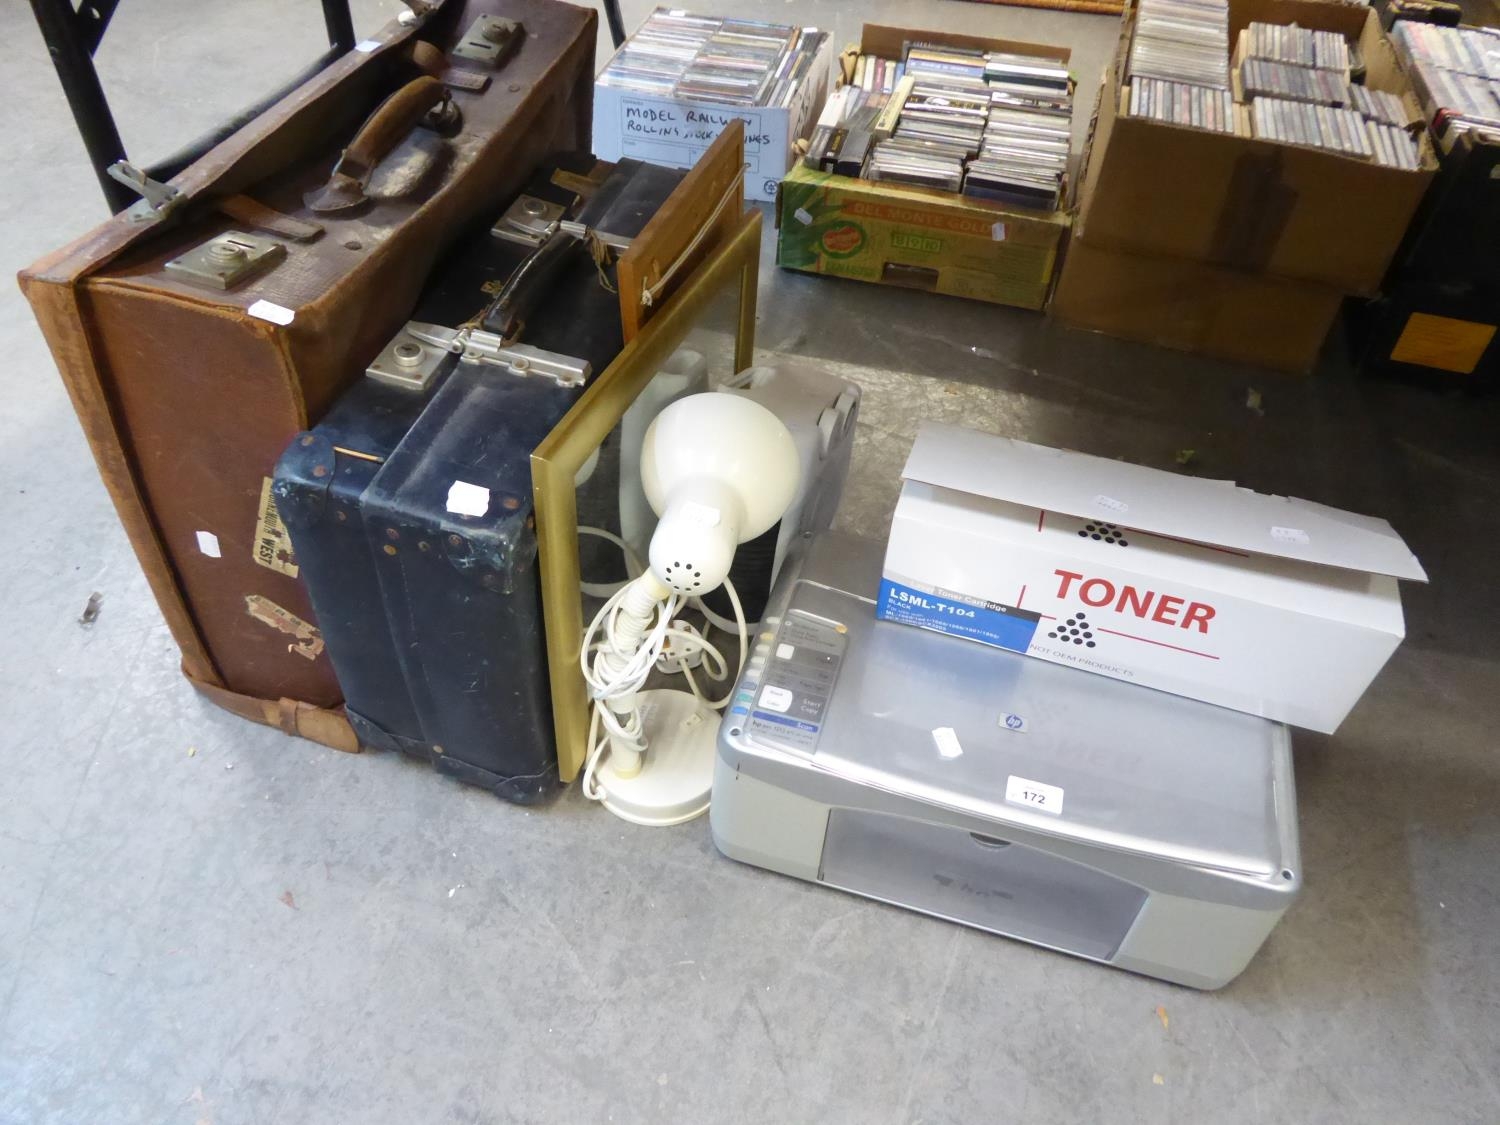 AN 'ELPINE' ELECTRIC HEATER, A HP PRINTER, AN OLD BROWN LEATHER SUITCASE ETC.....